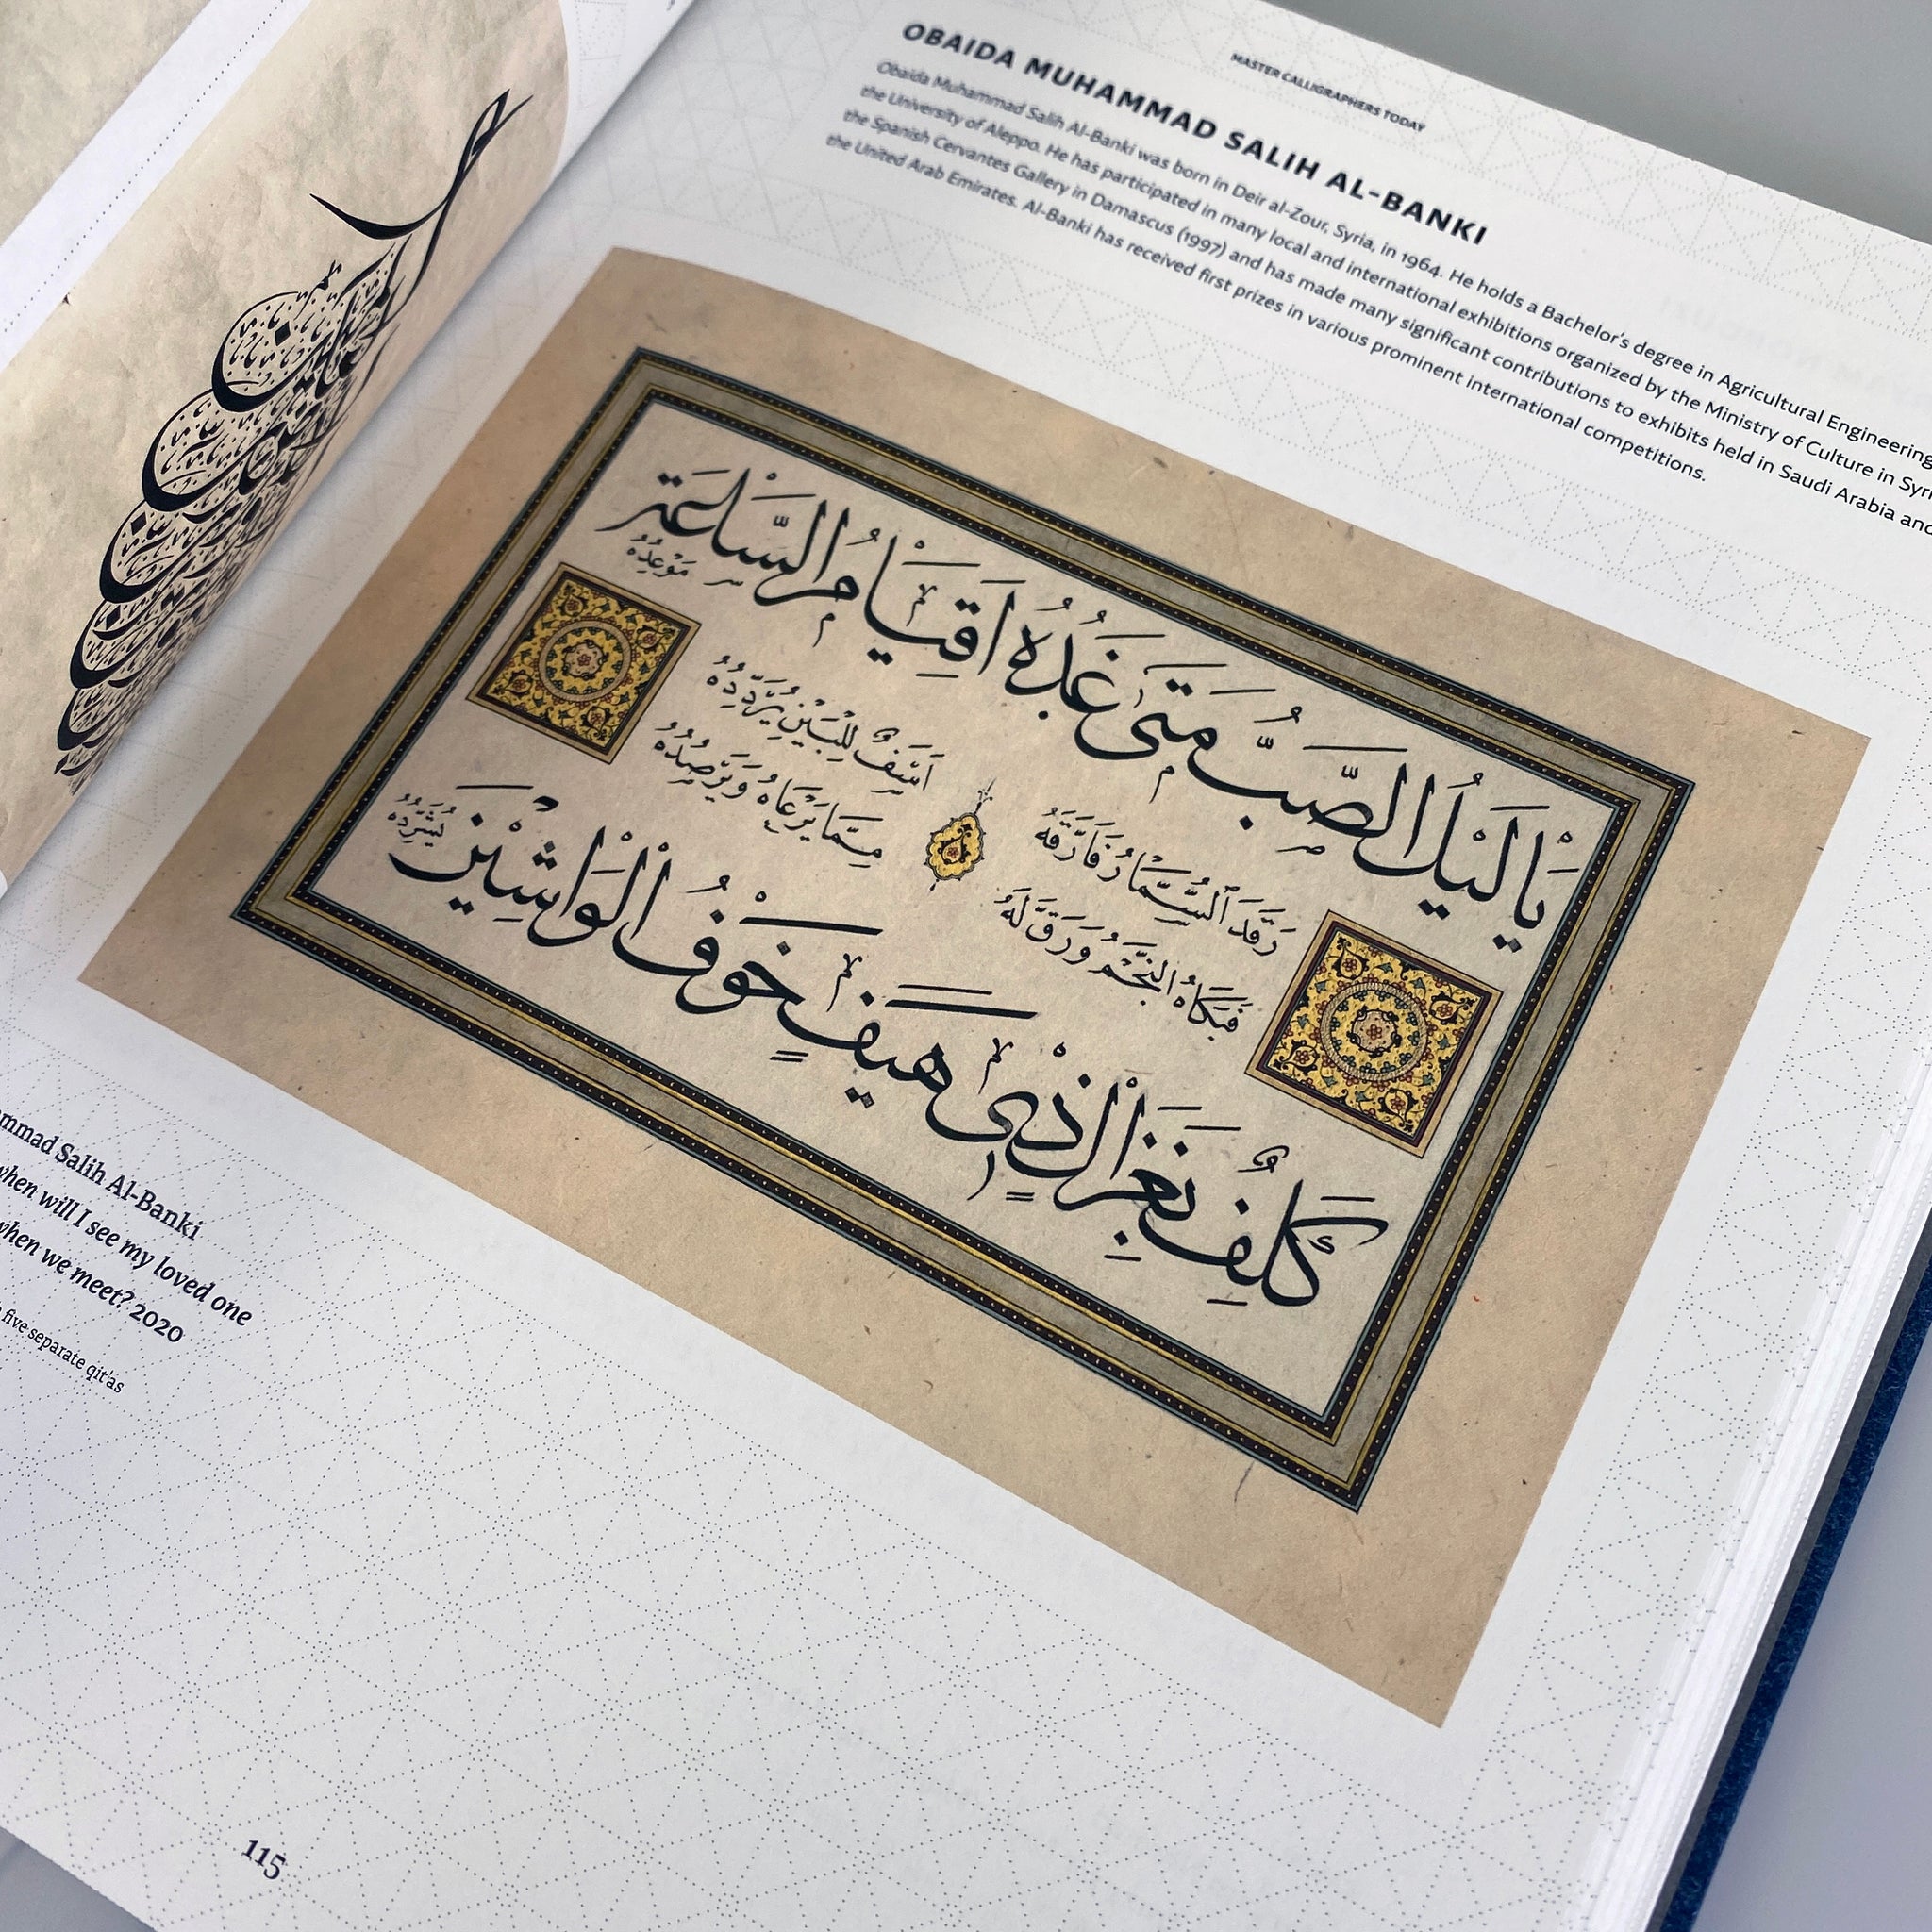 Calligraphy as Identity: Defining Arabness in Script - New Lines Magazine